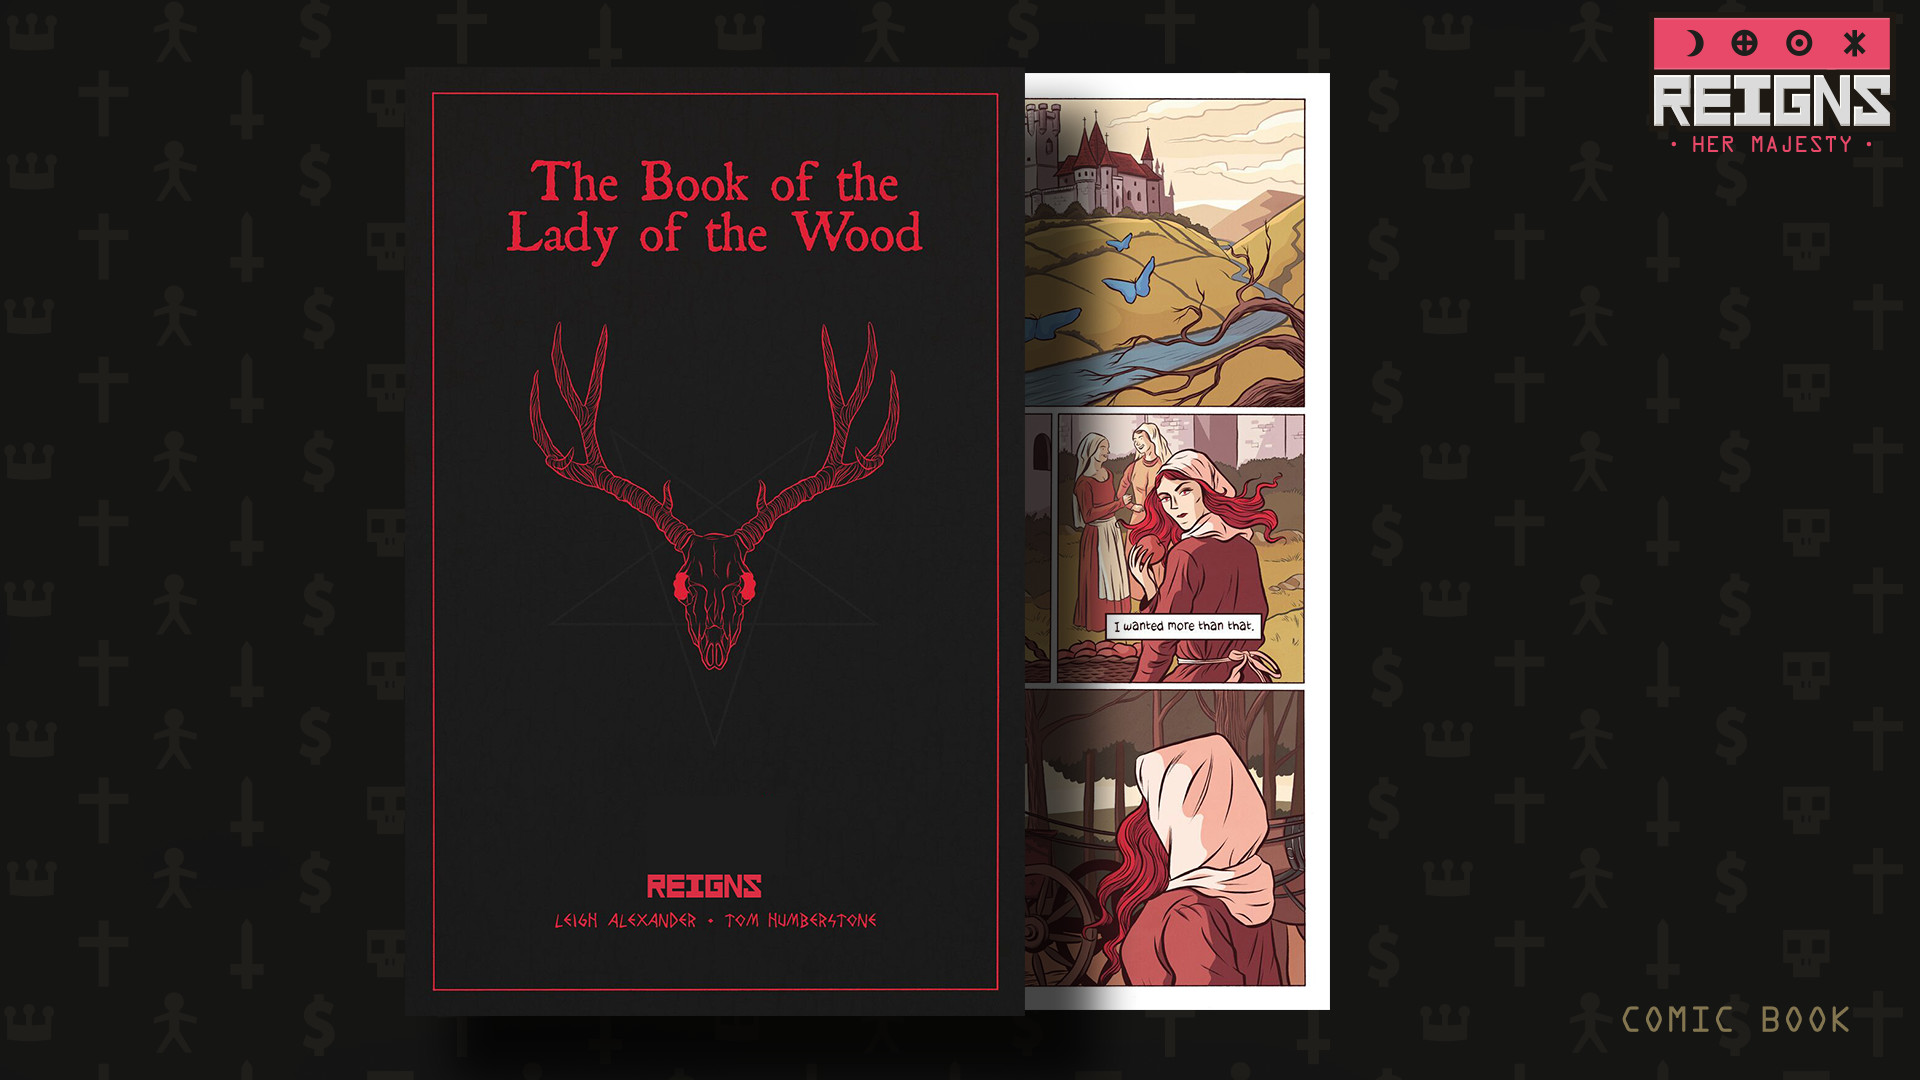 Reigns: Her Majesty - The Book of the Lady of the Wood Featured Screenshot #1